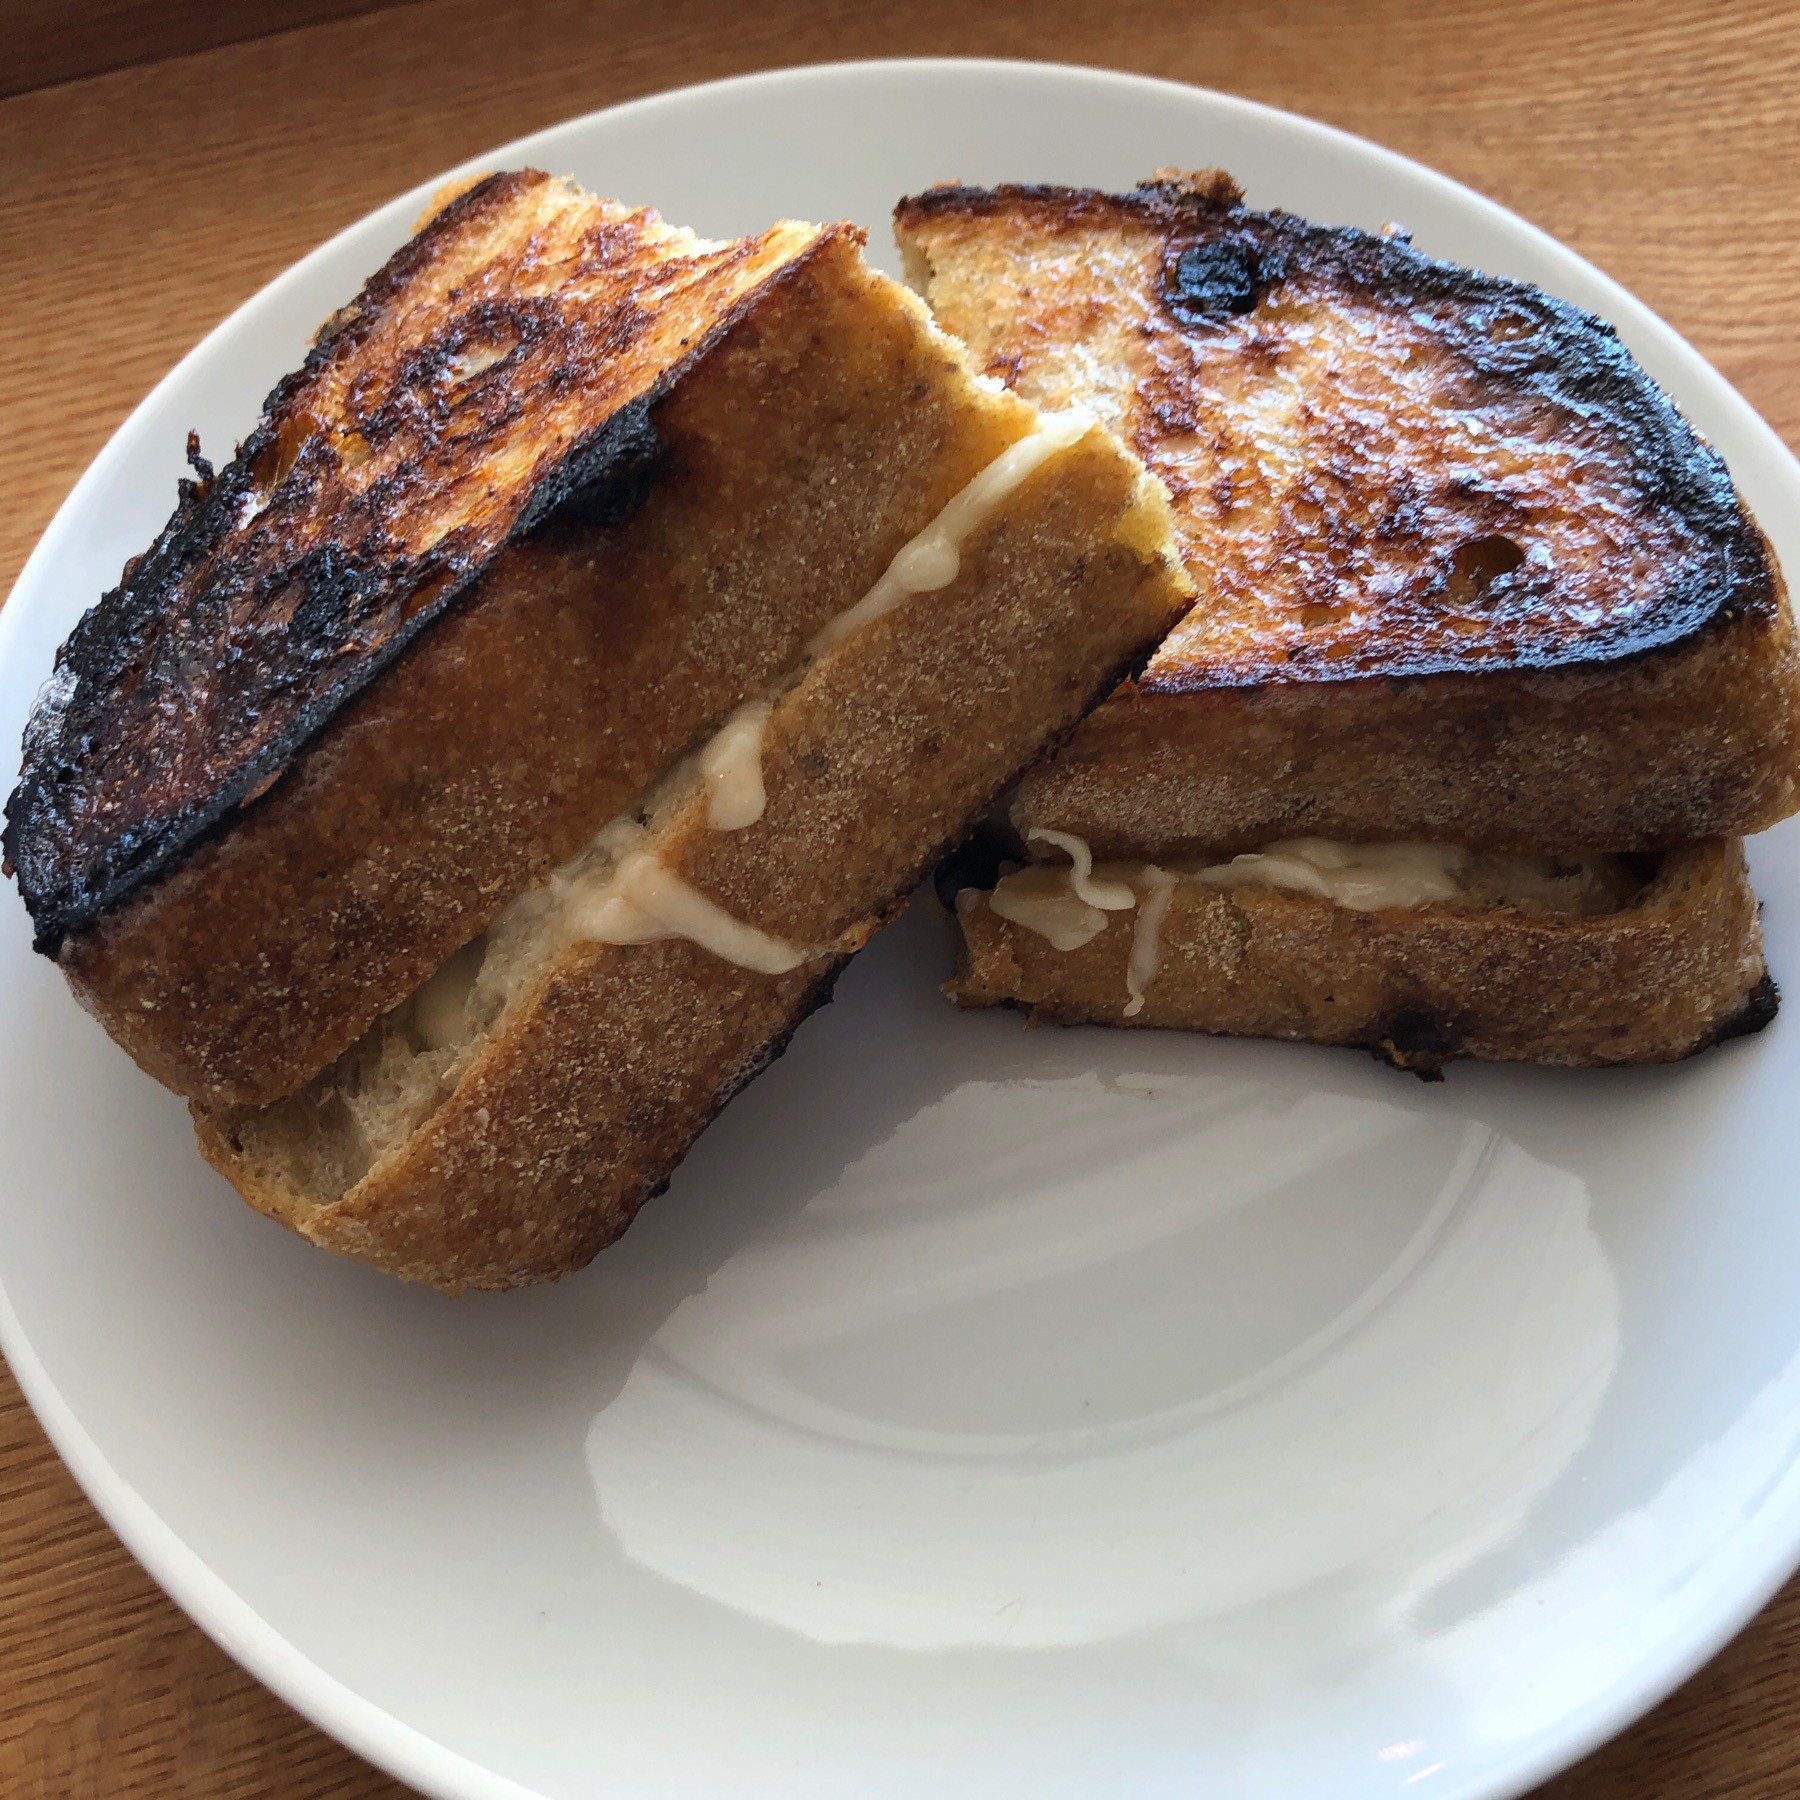 Grilled cheese sandwich on plate.